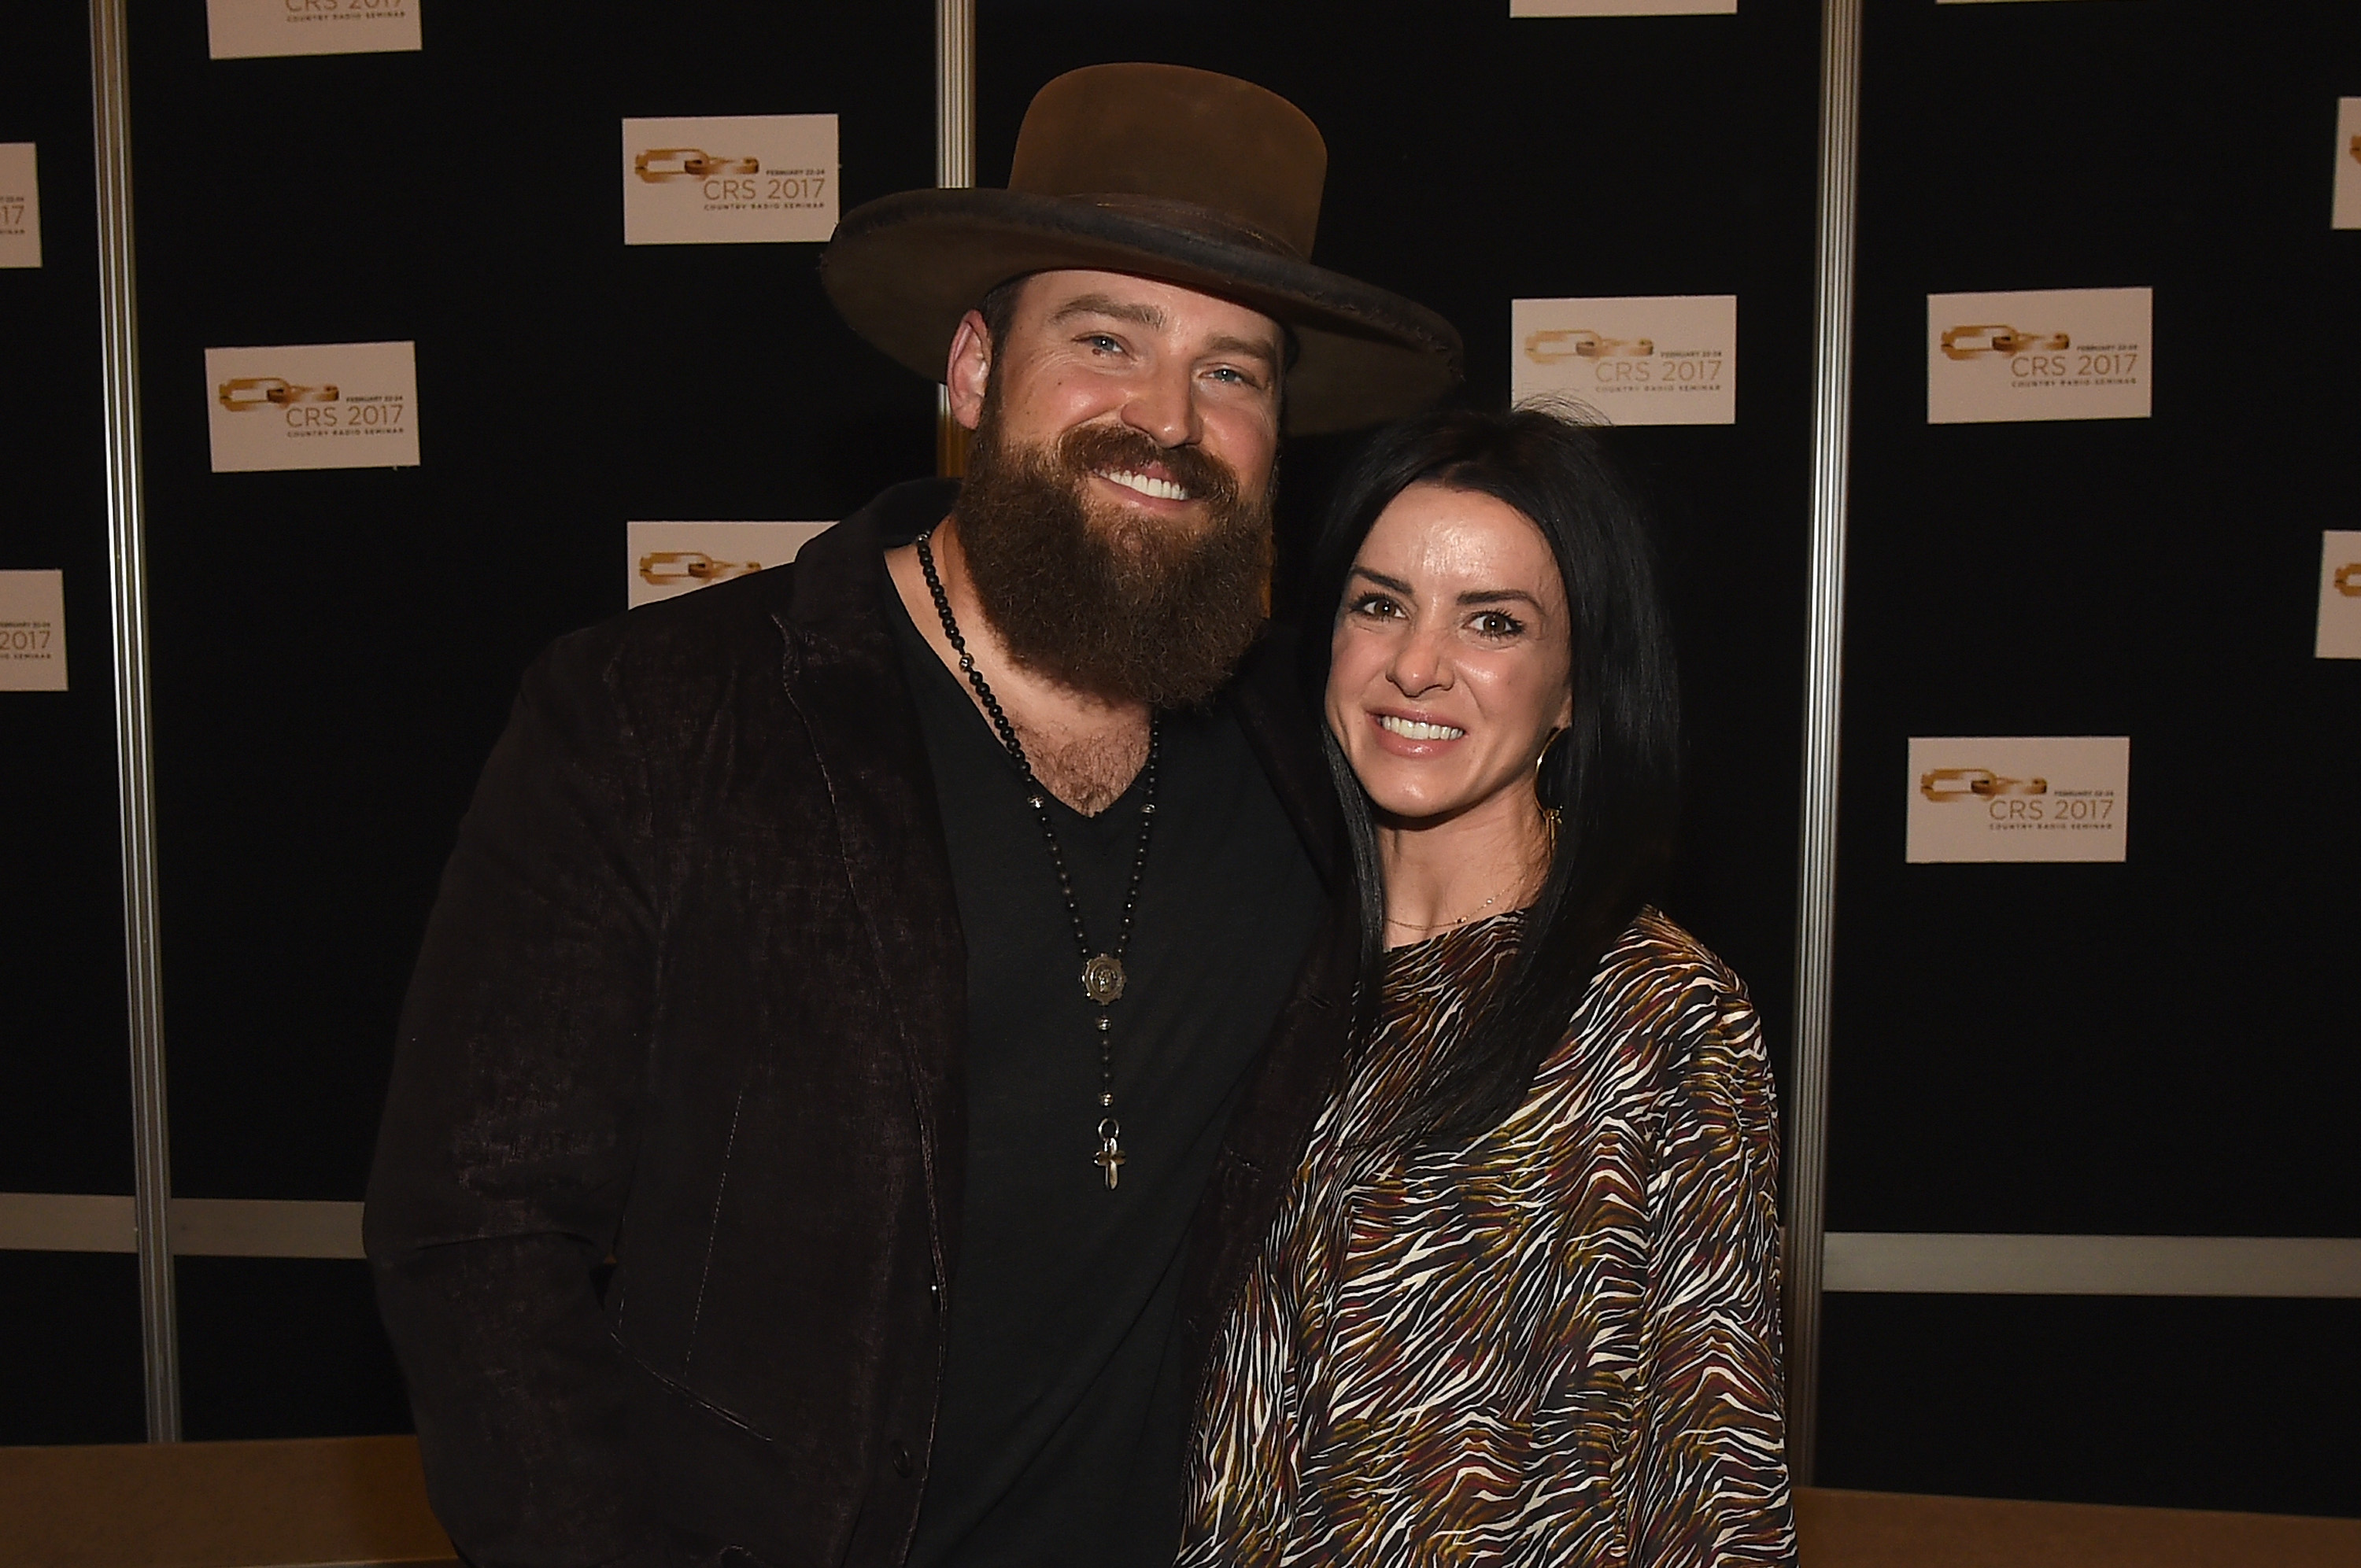 Zac Brown and Shelly Brown at the CRS 2017 event on February 22, 2017, in Nashville | Source: Getty Images